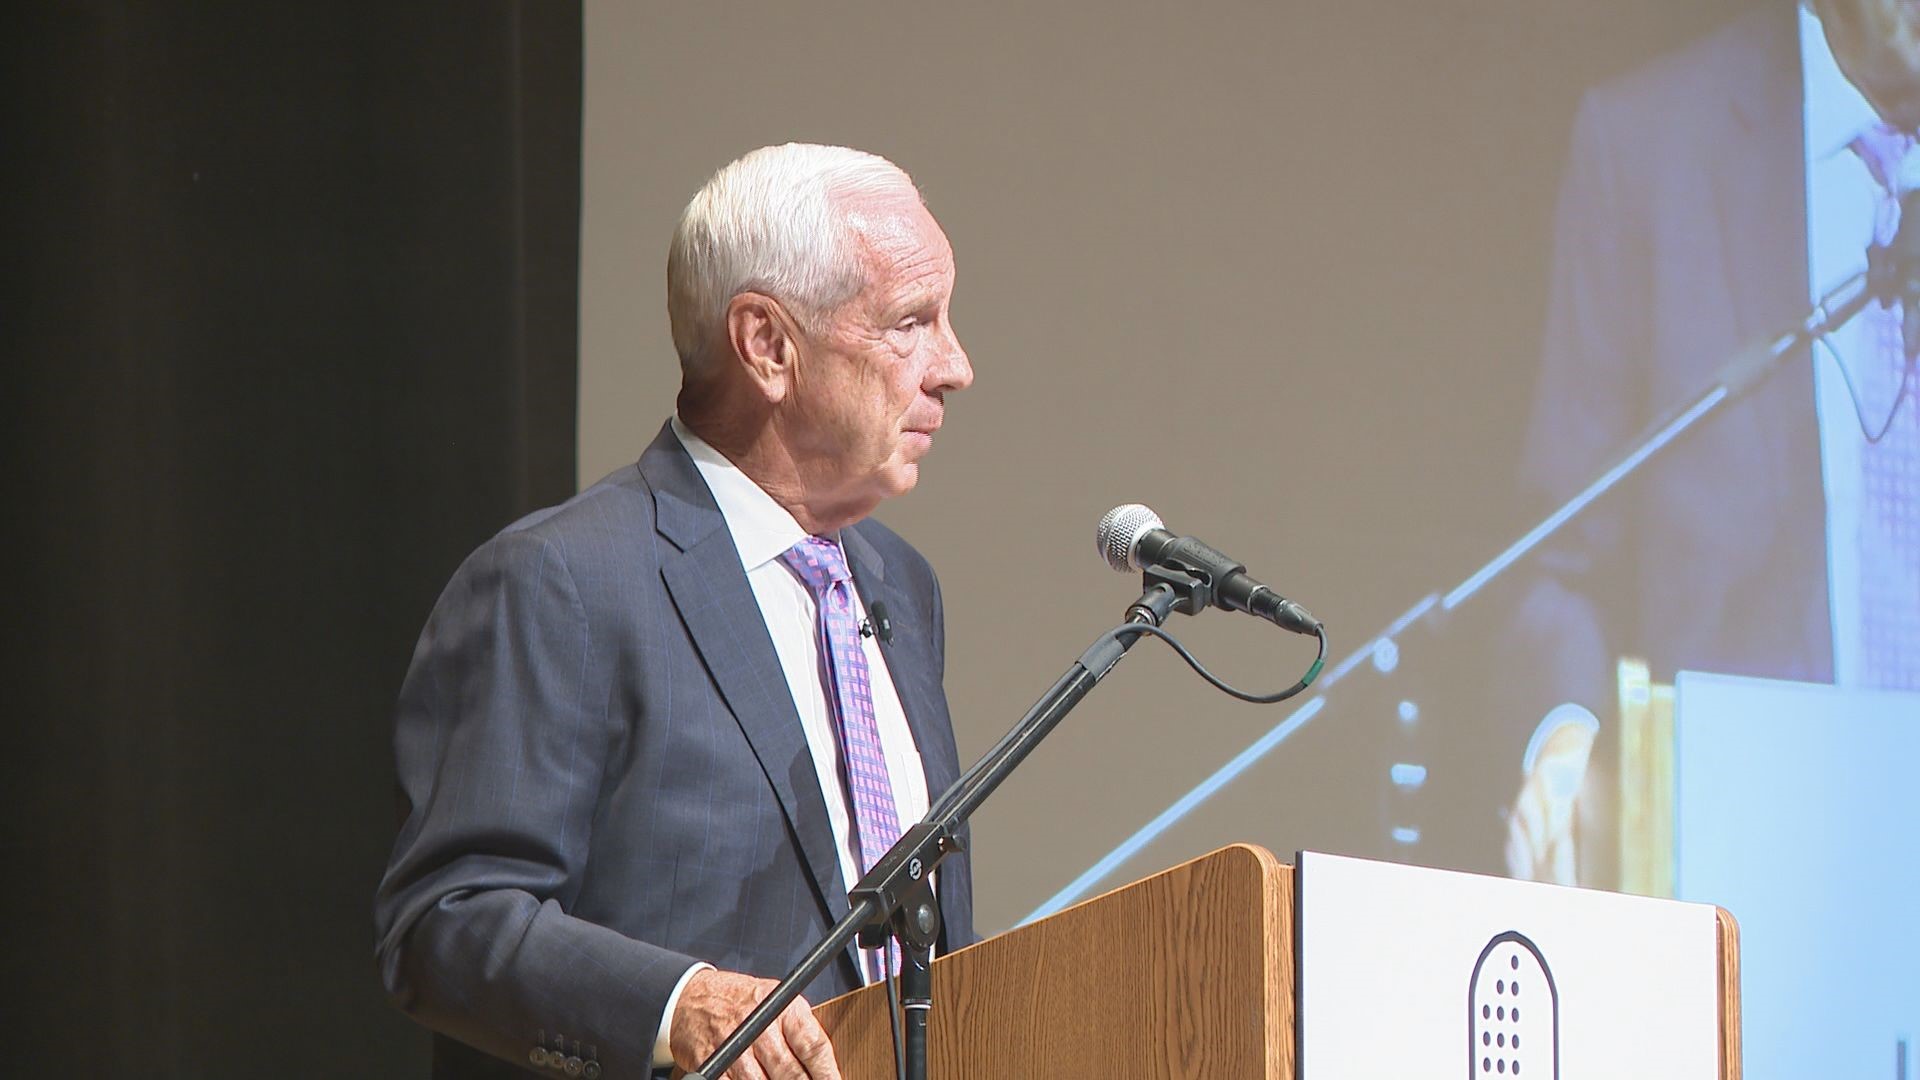 Roy Williams spoke at the annual Norfolk Forum on Tuesday night from Chrysler Hall.